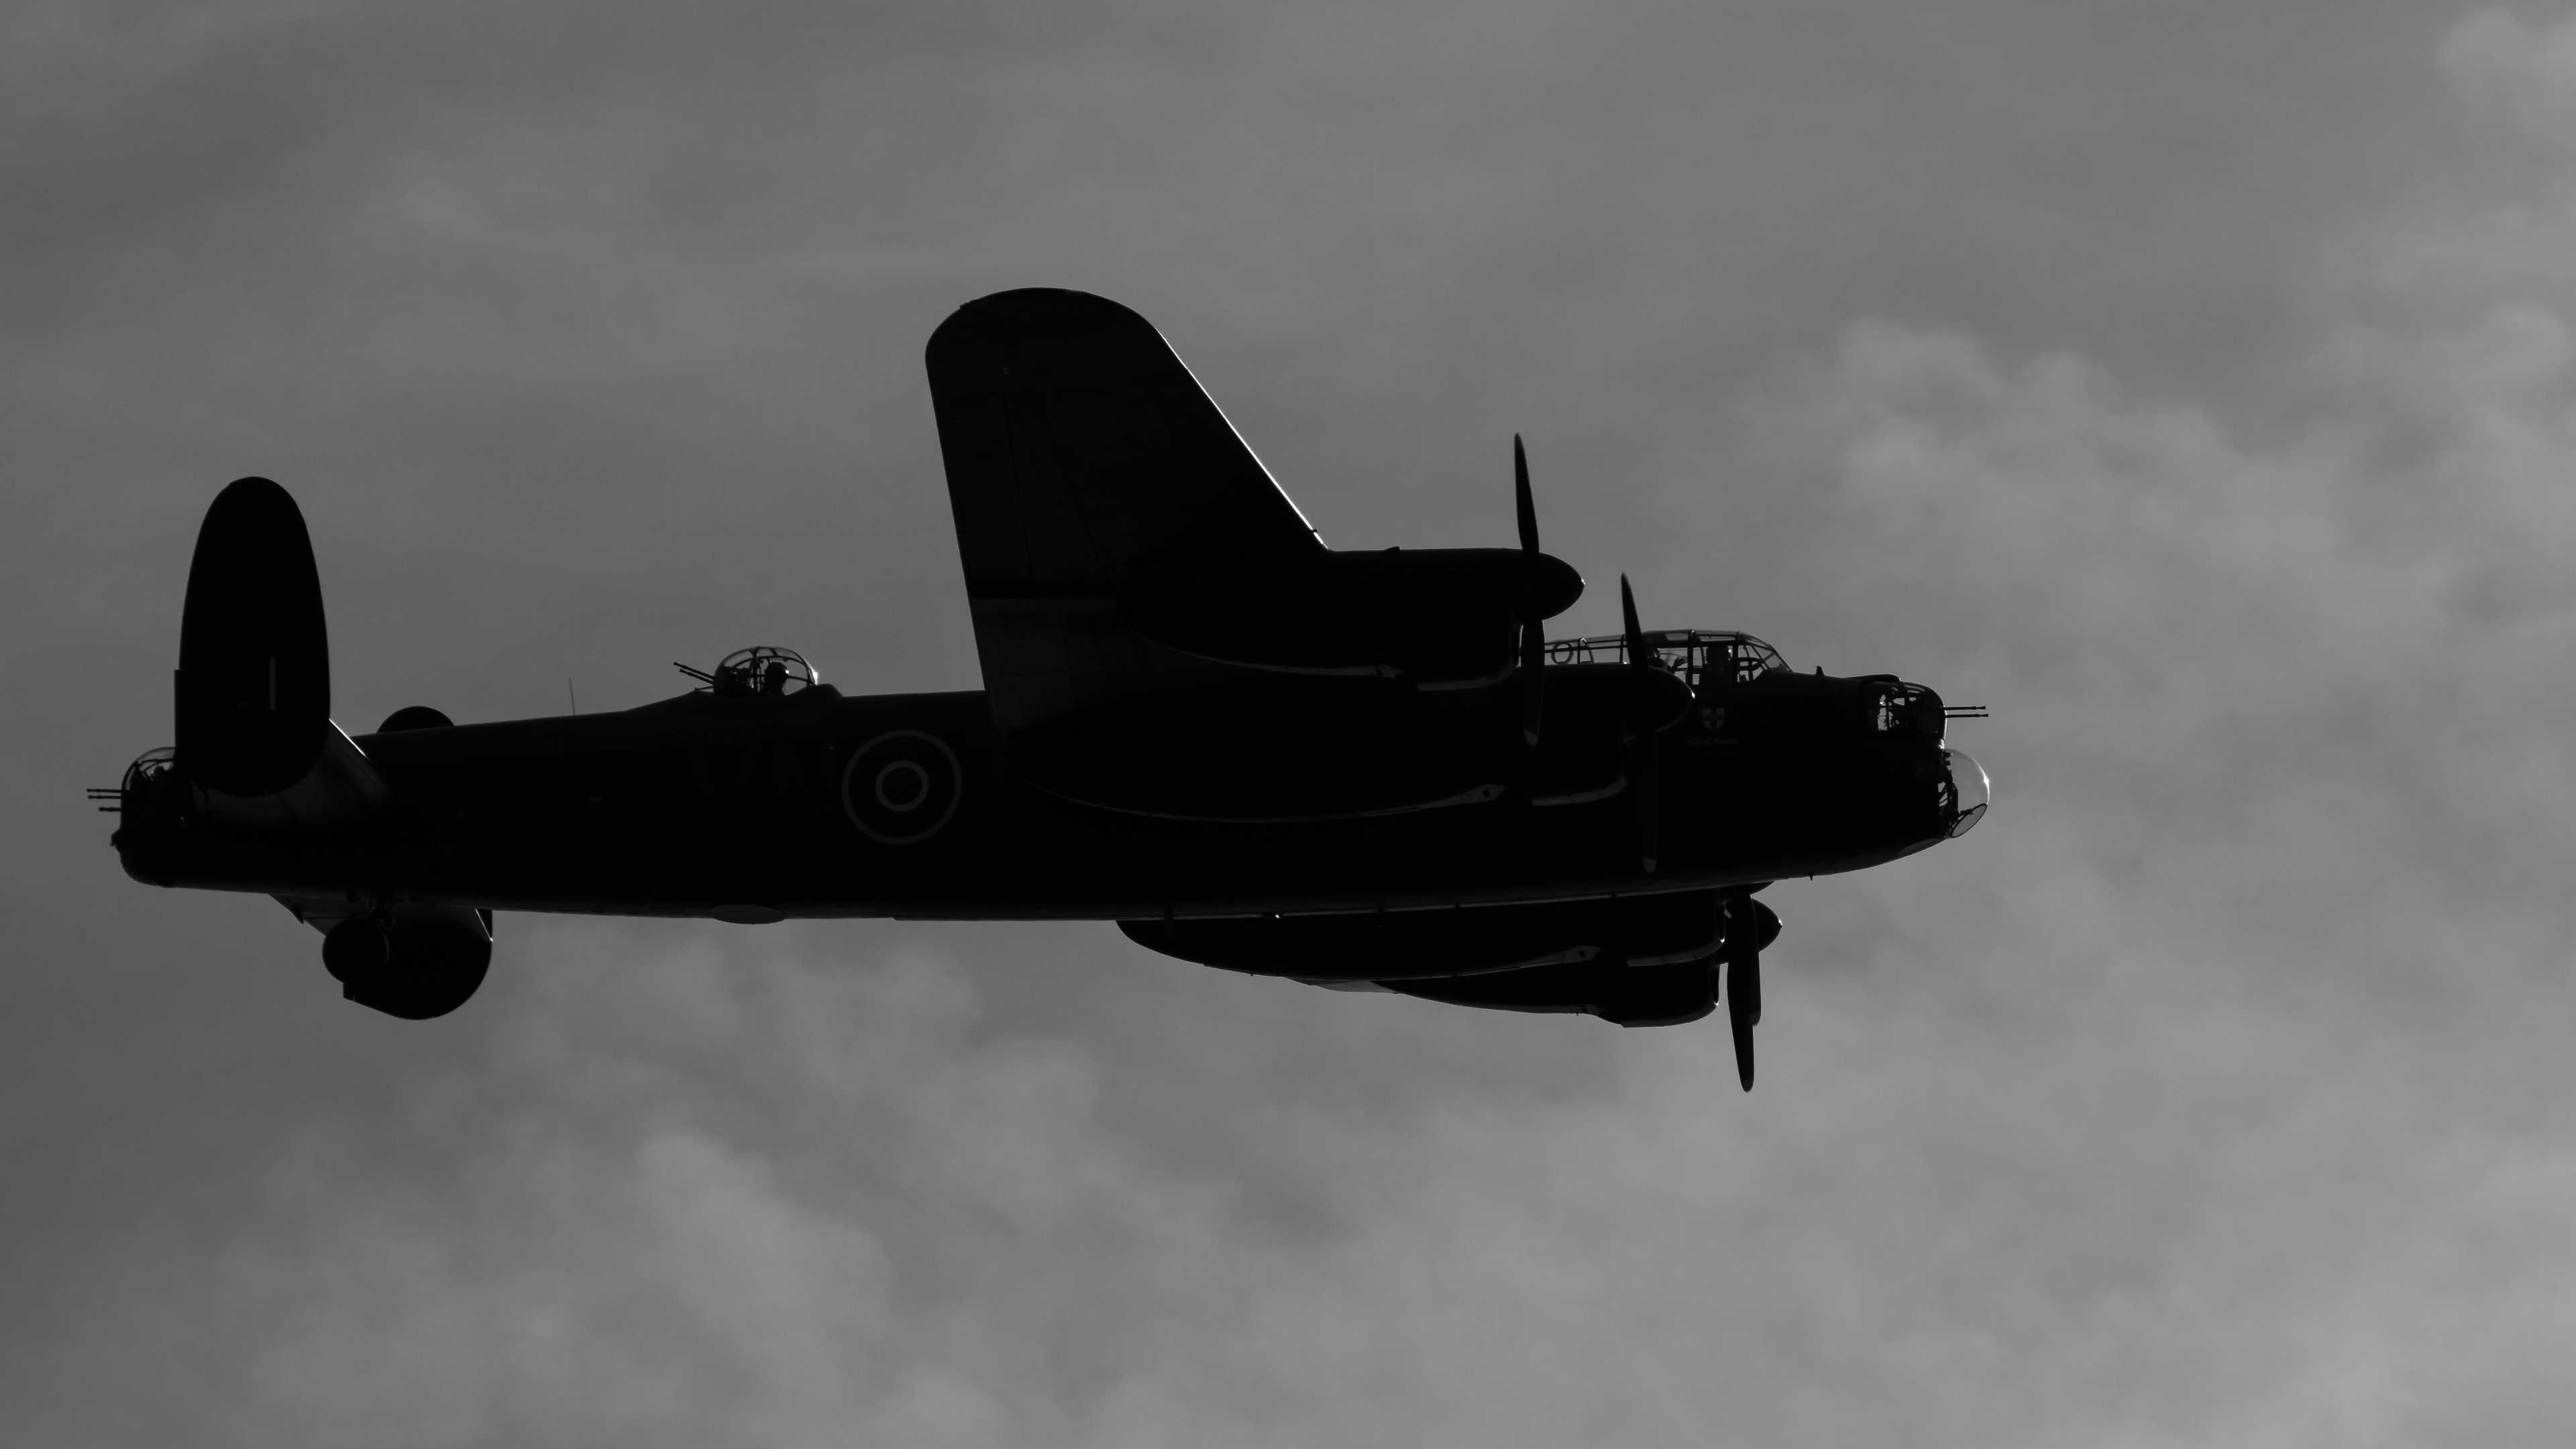 General 3840x2160 Avro Lancaster aircraft military aircraft Bomber World War II monochrome Royal Air Force history silhouette British aircraft